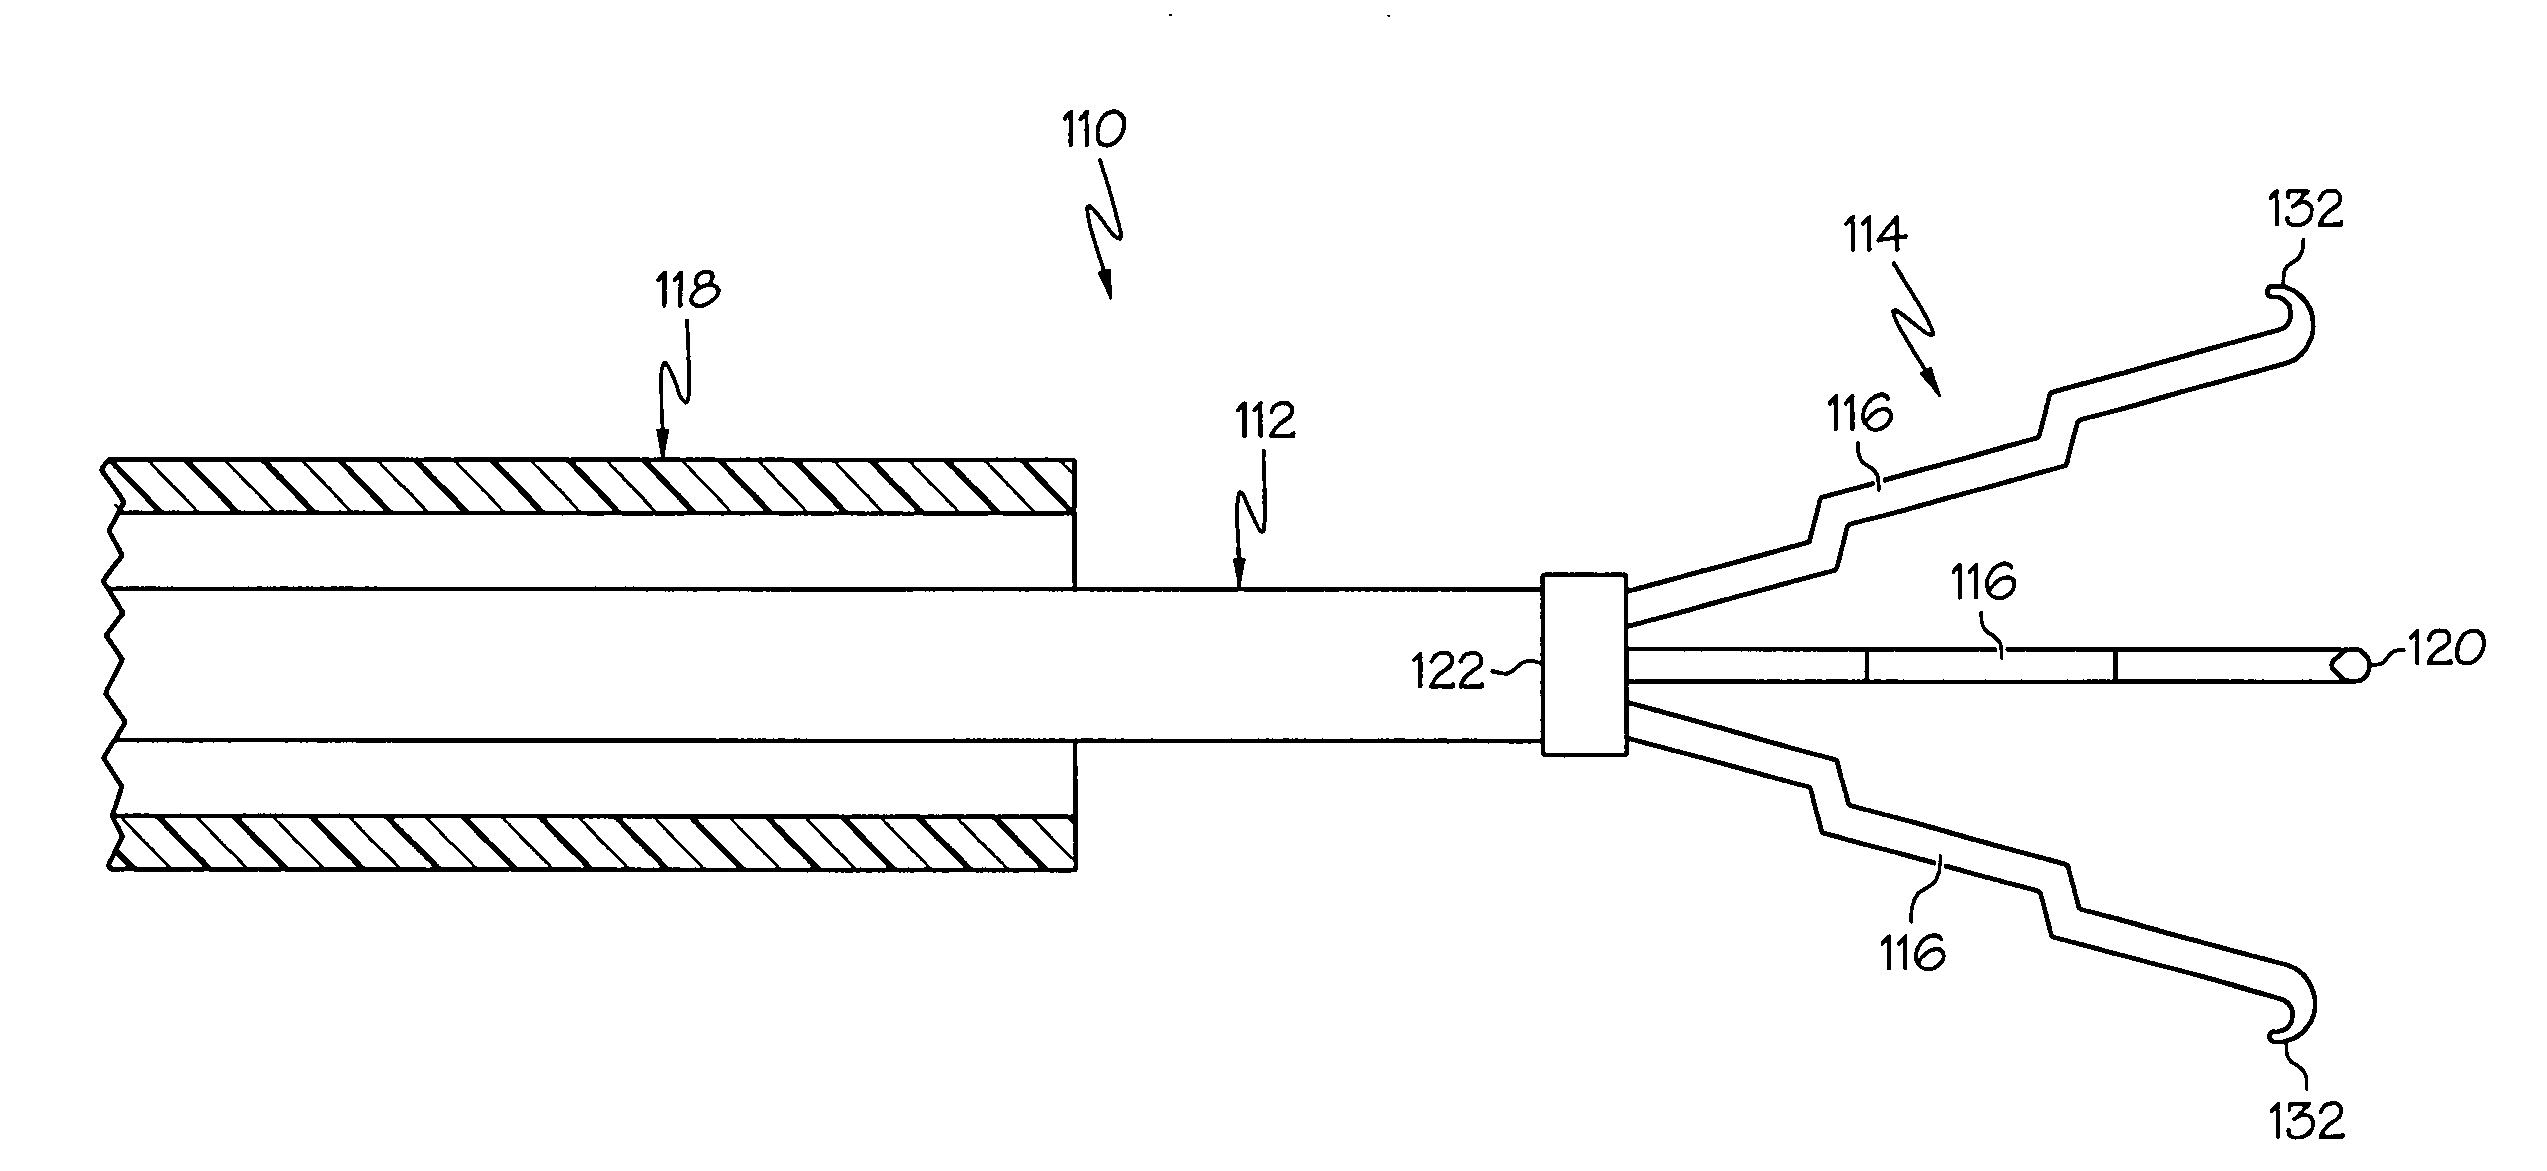 Guidewire structure including a medical guidewire